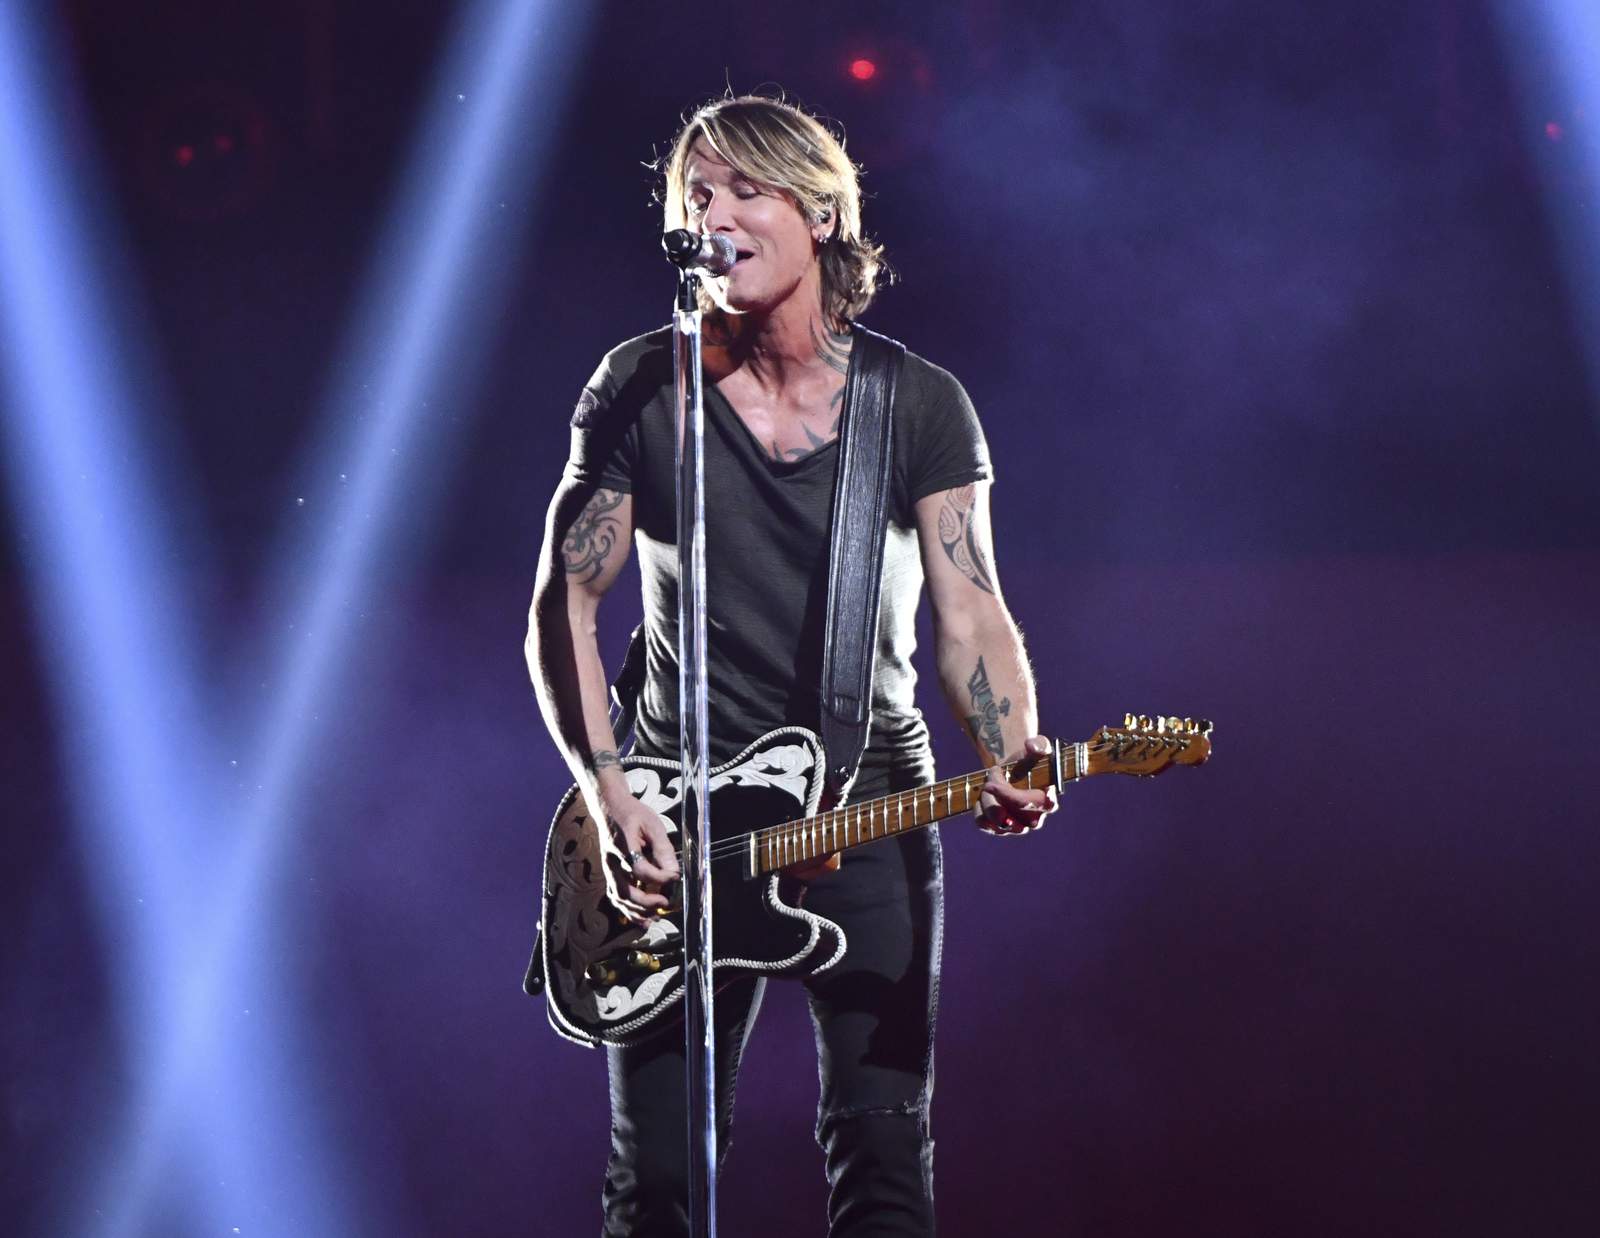 Keith Urban finds musical connections across genre lines